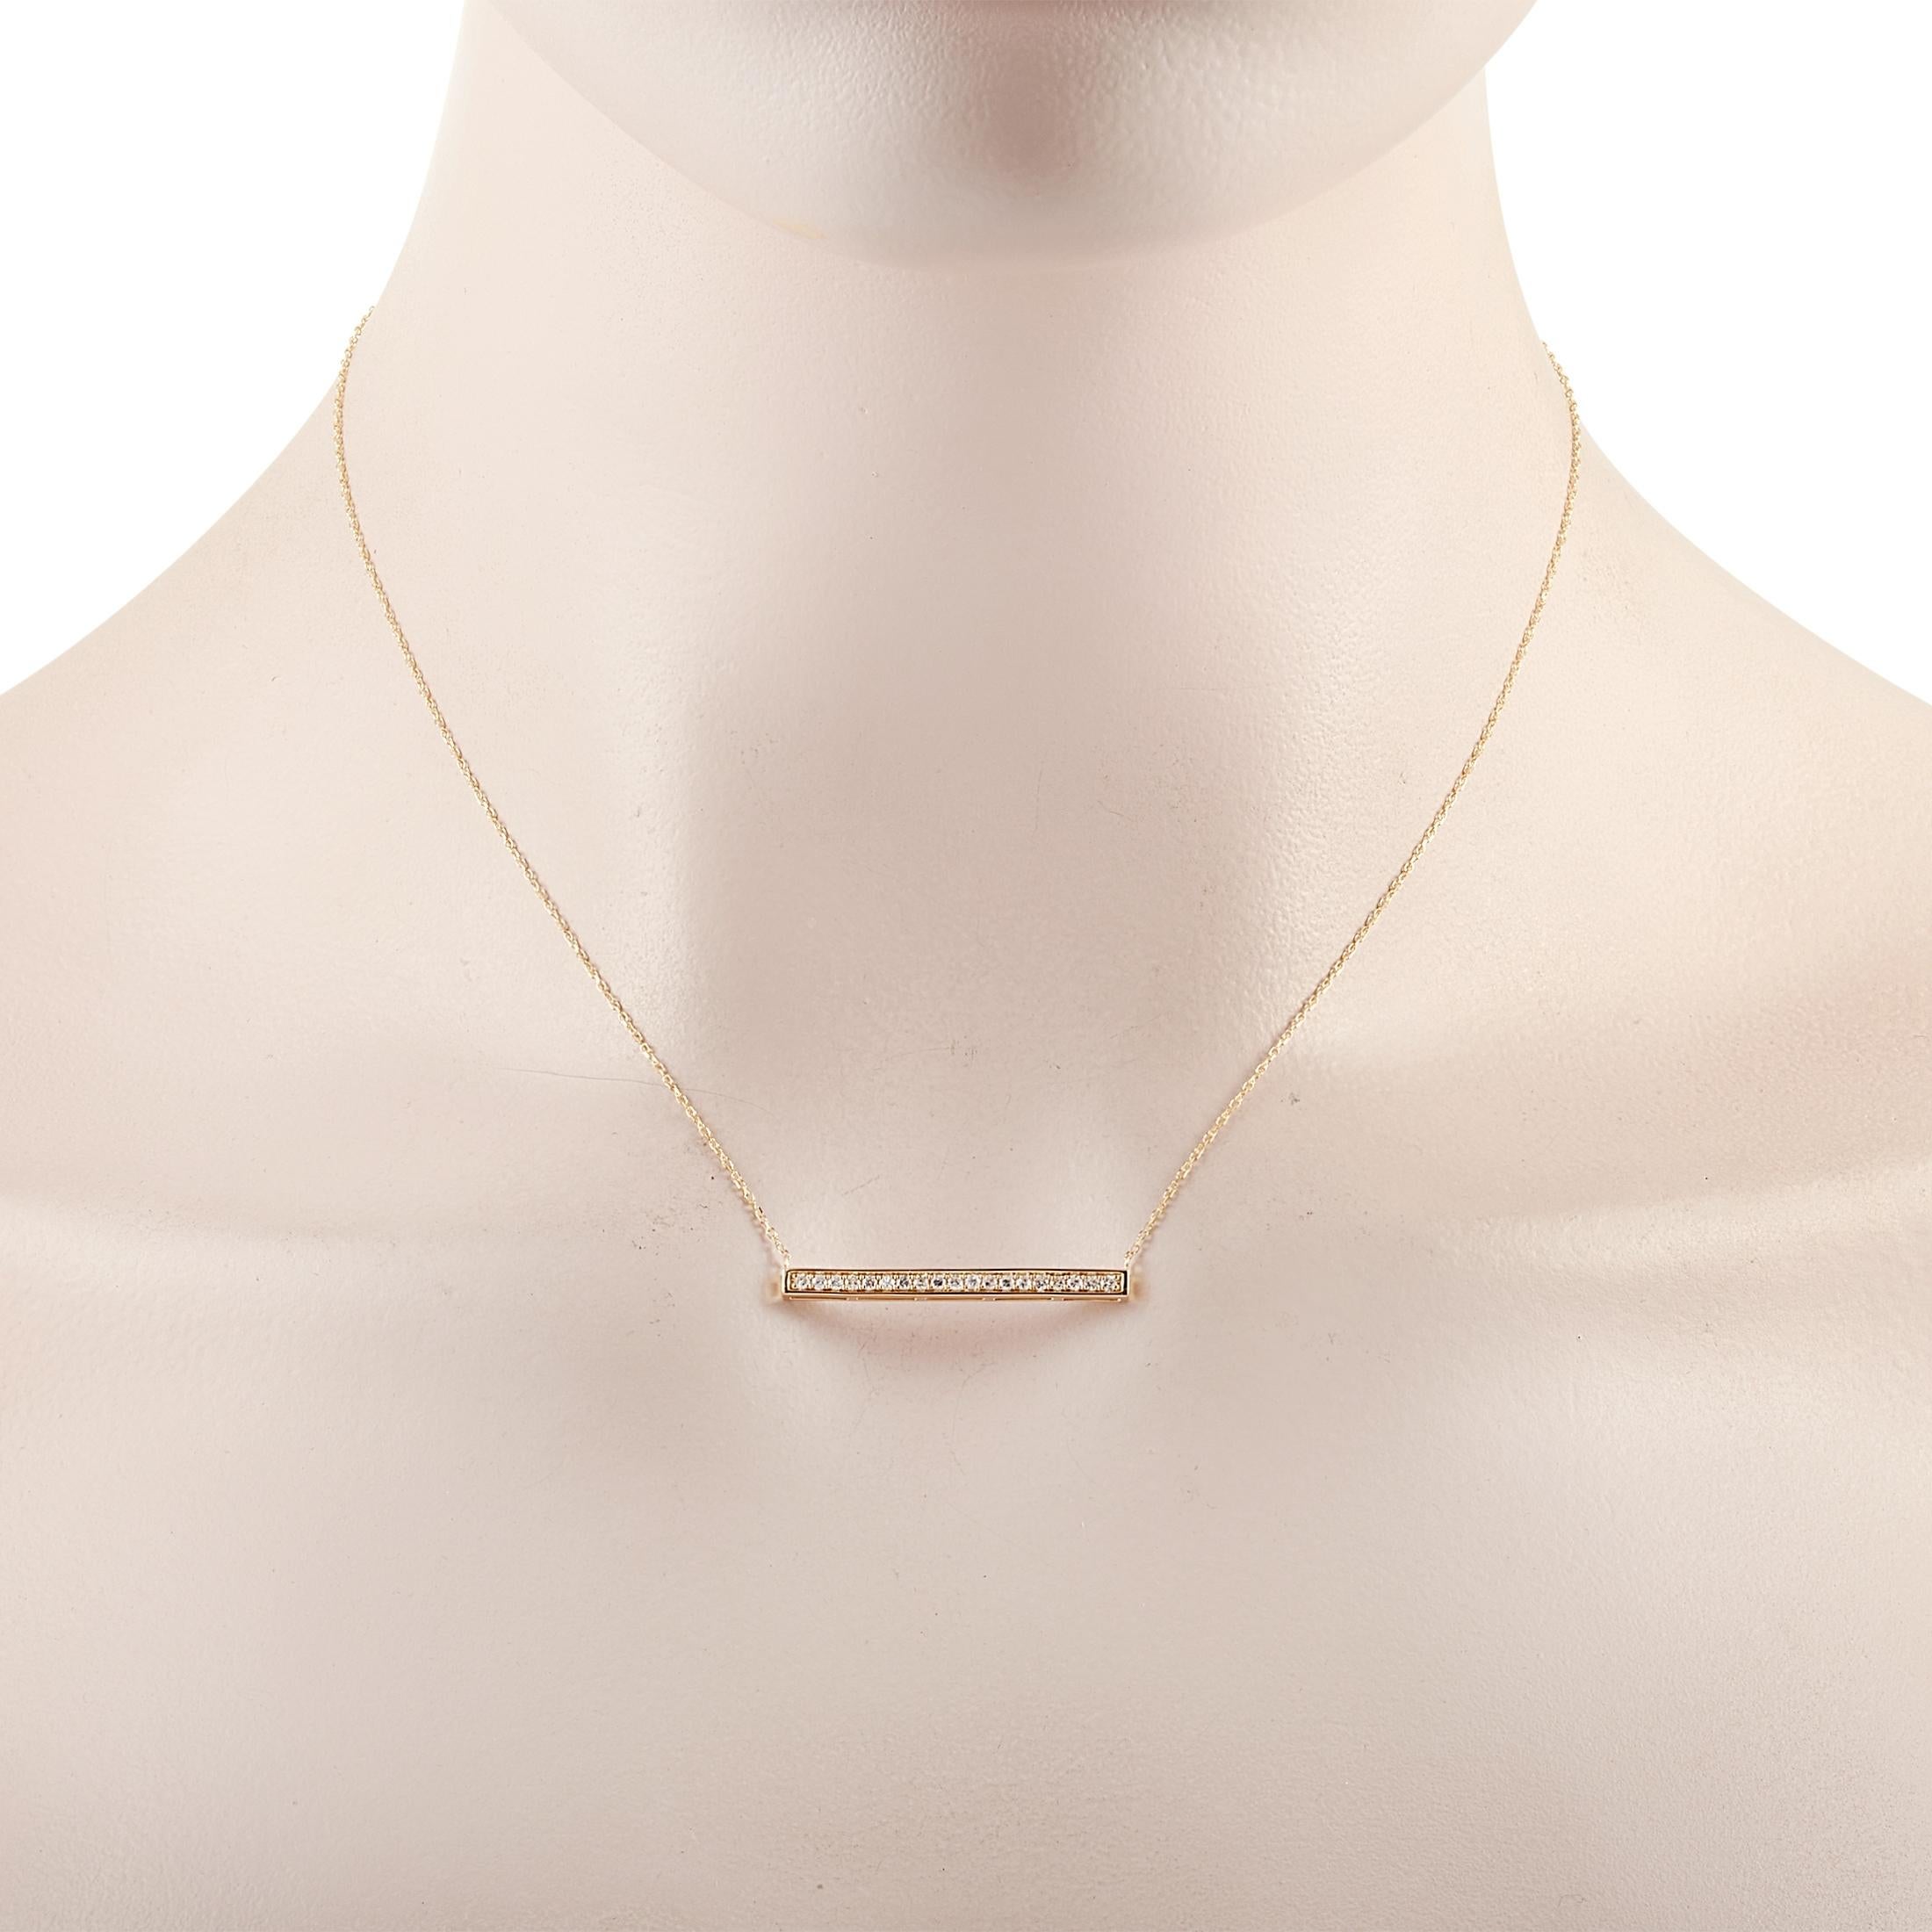 This LB Exclusive necklace is crafted from 14K yellow gold and weighs 2.1 grams. It is presented with a 15” chain and boasts a pendant that measures 0.13” in length and 1.25” in width. The necklace is set with diamonds that total 0.25